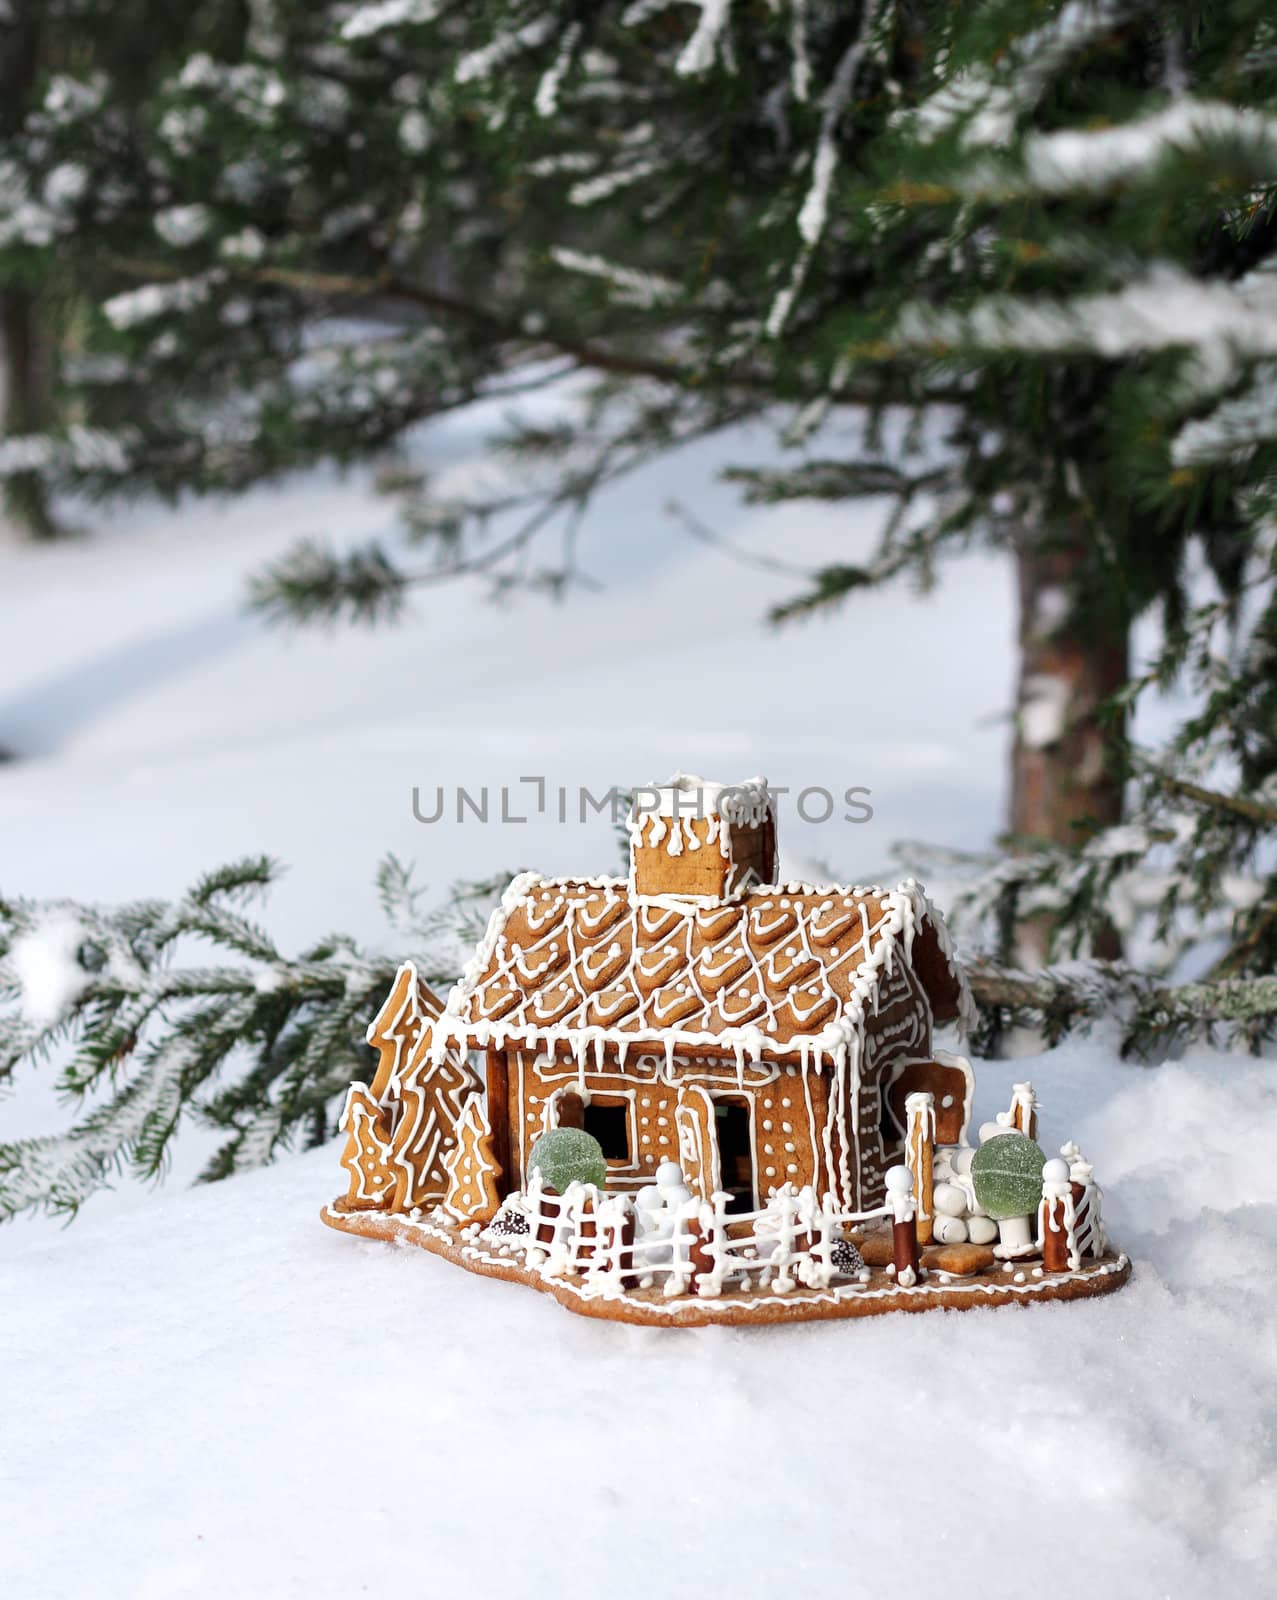 Gingerbread house in real winter snowy Christmas forest background